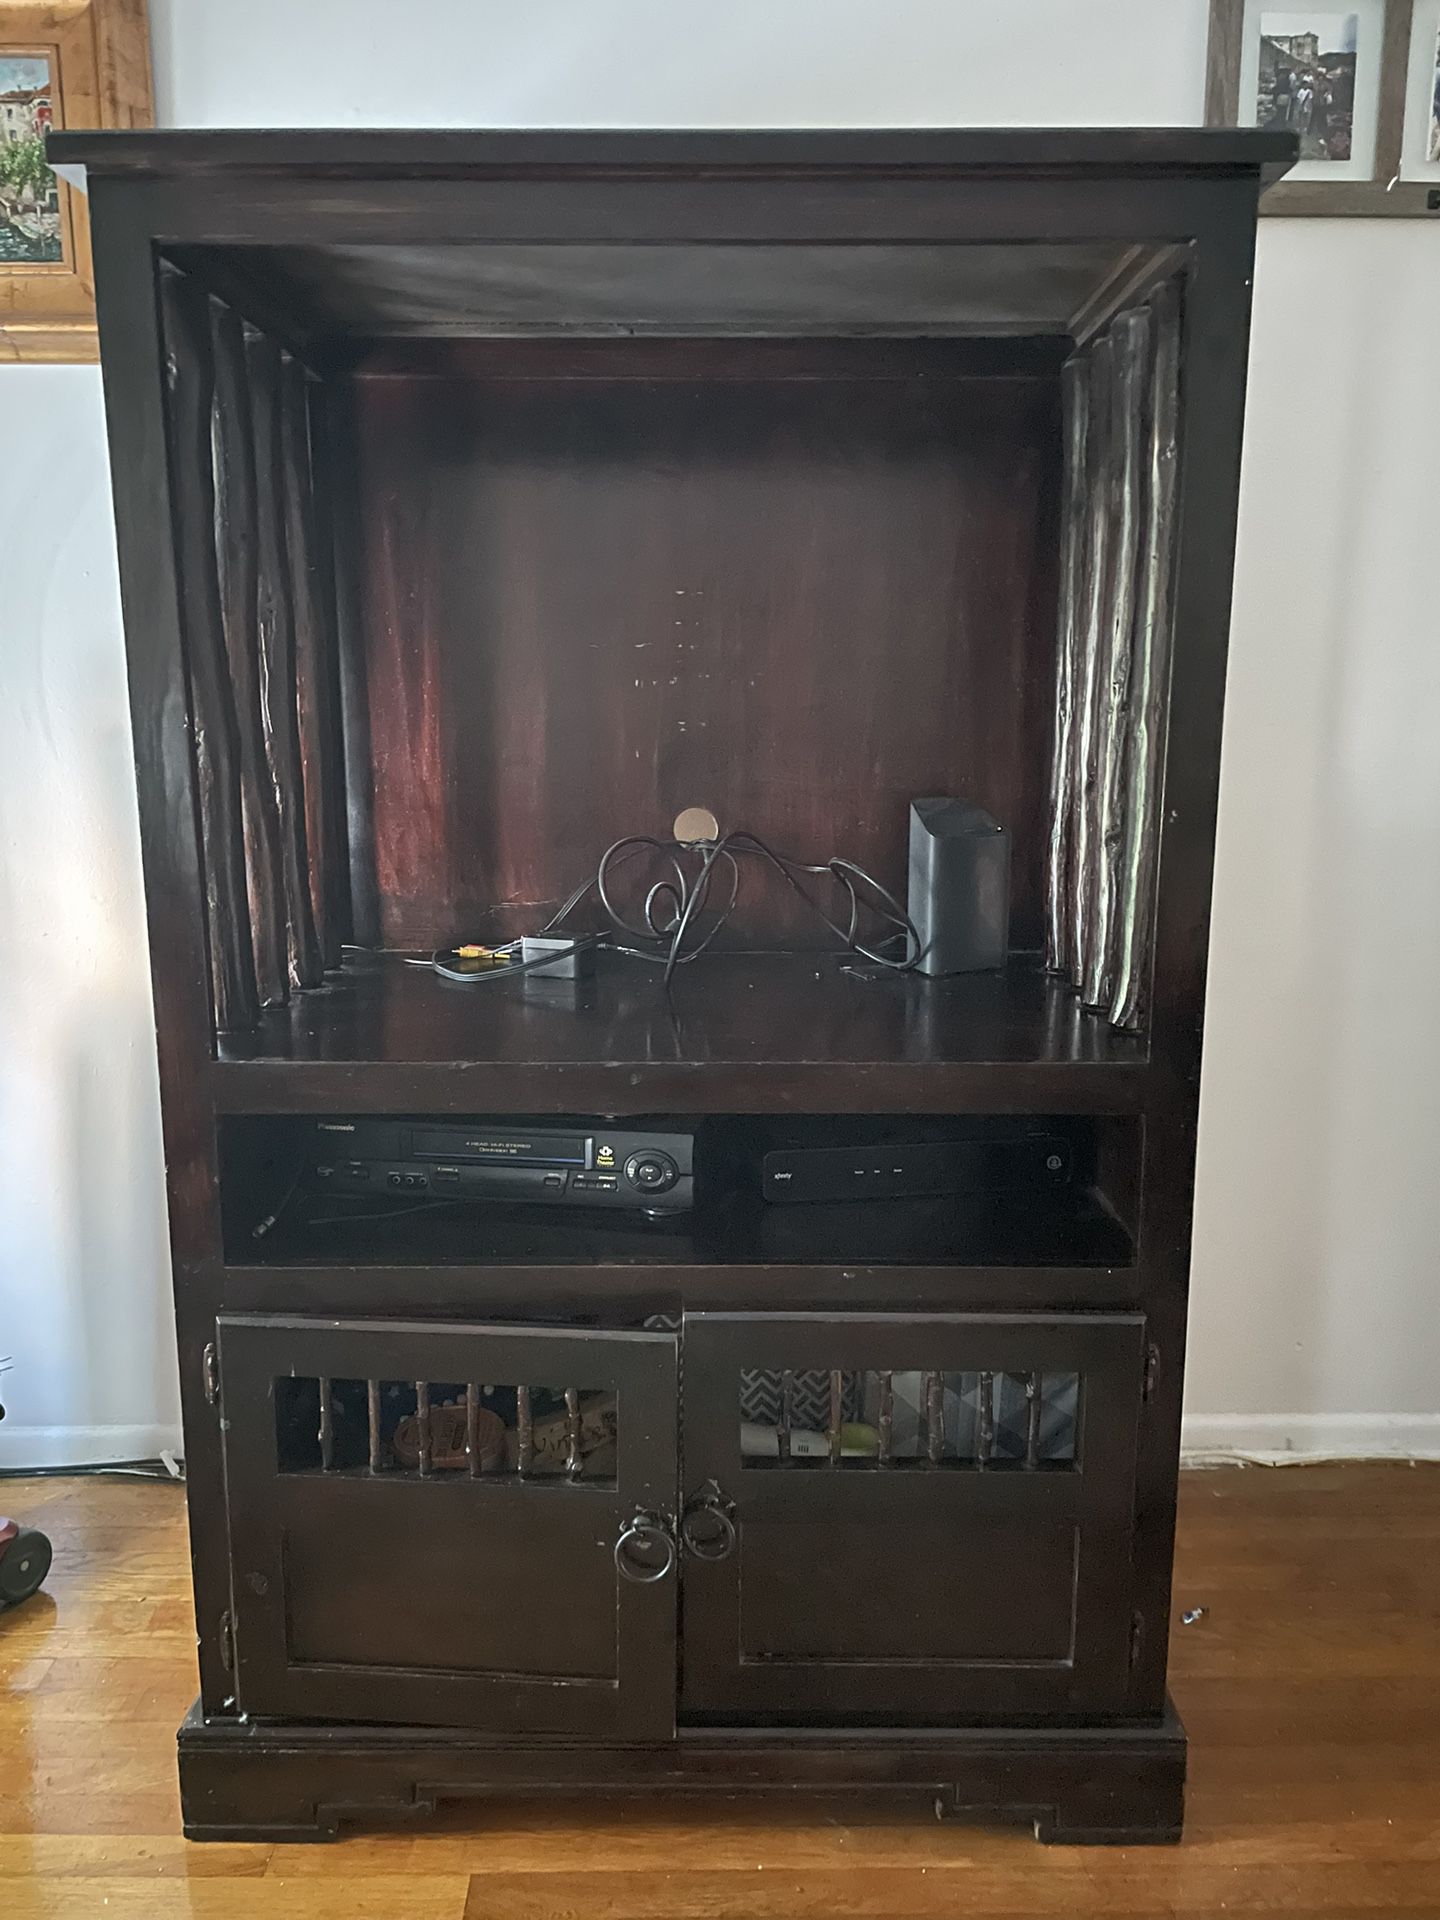 SOLID WOOD TV STAND 